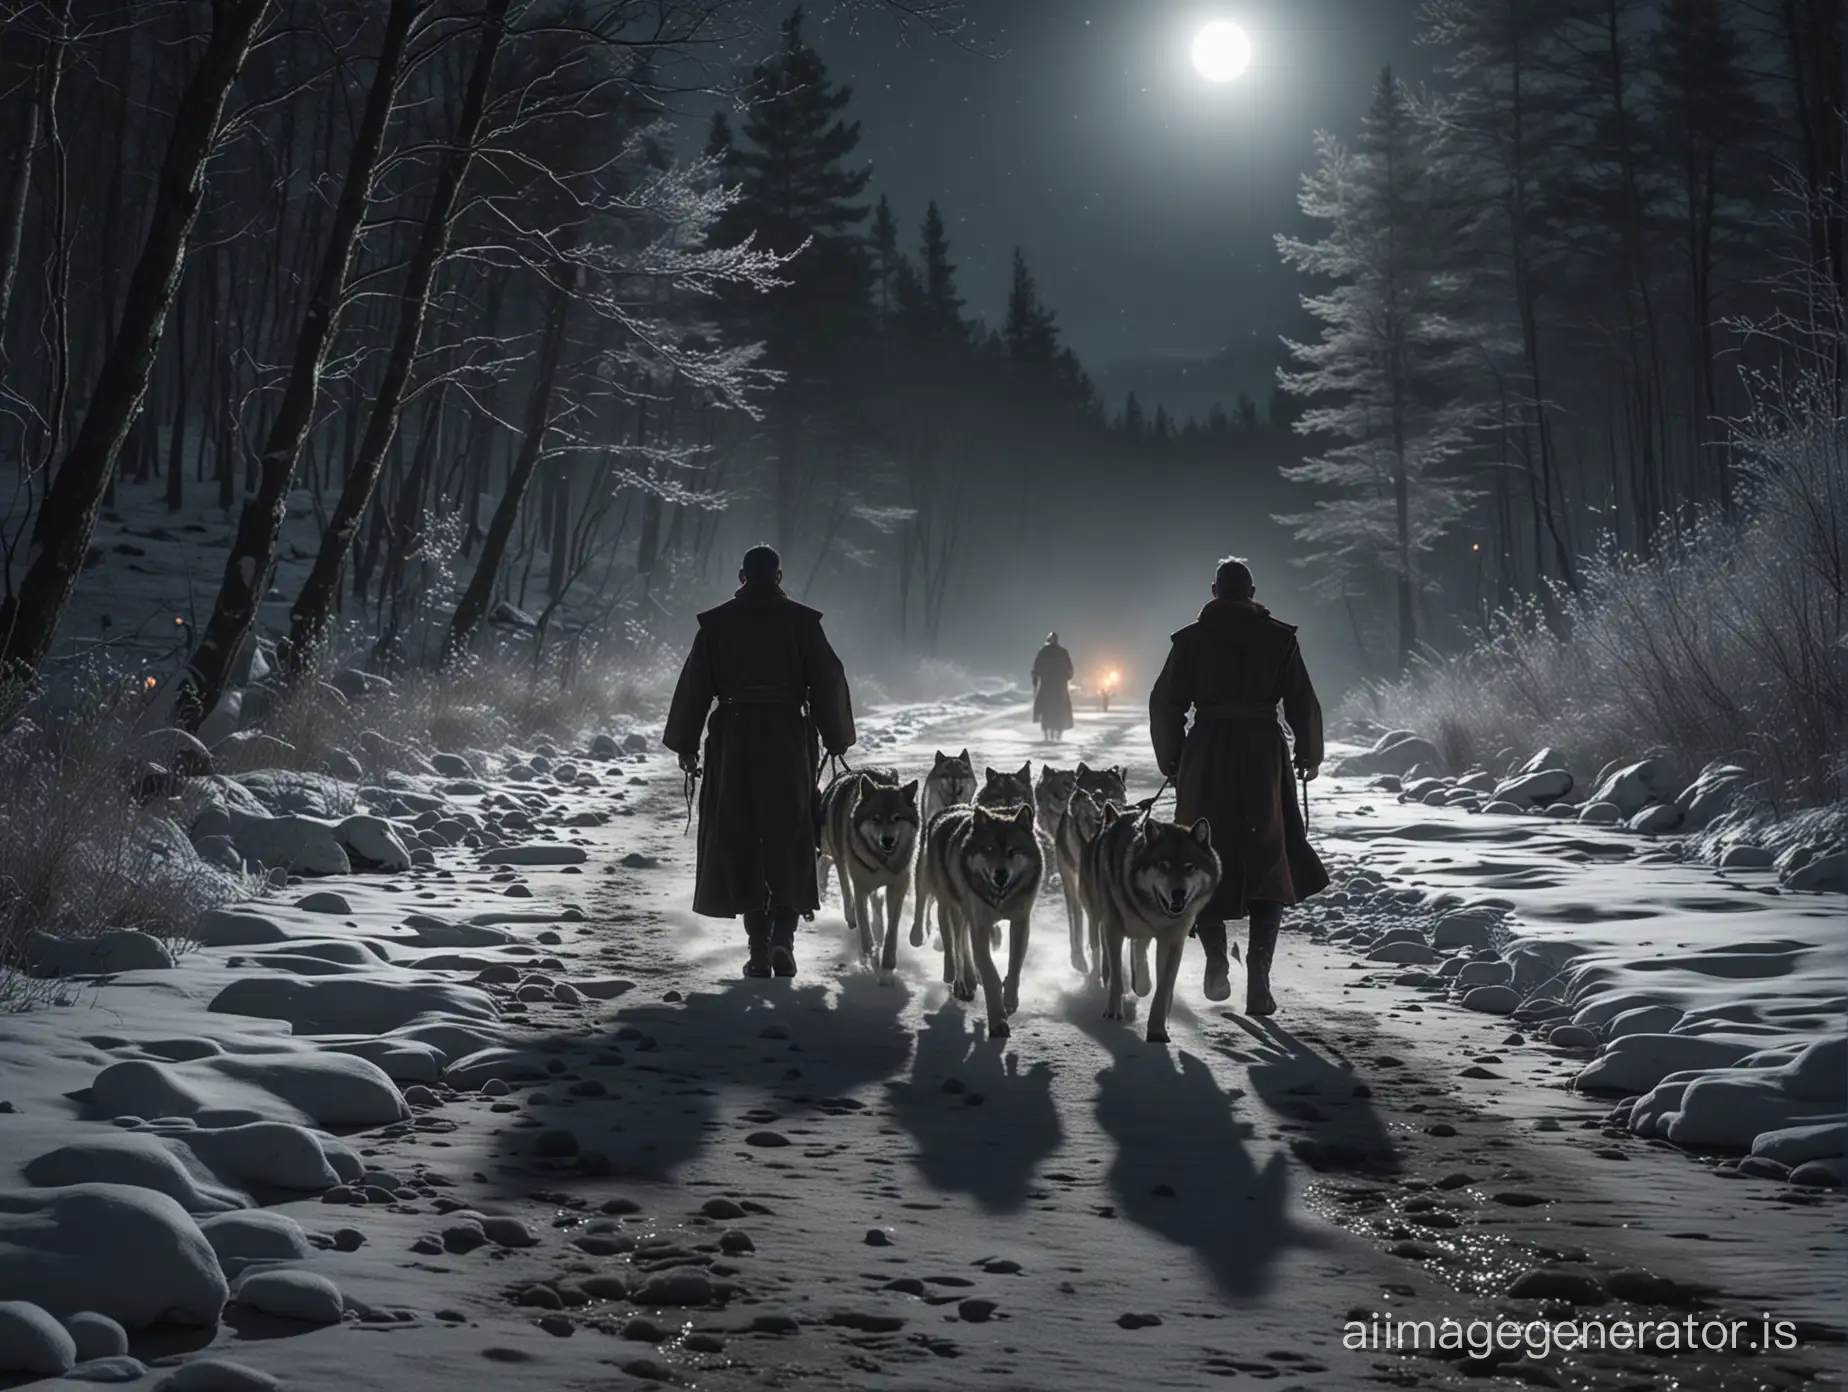 Clergyman-Fleeing-Wolves-in-Winter-Woods